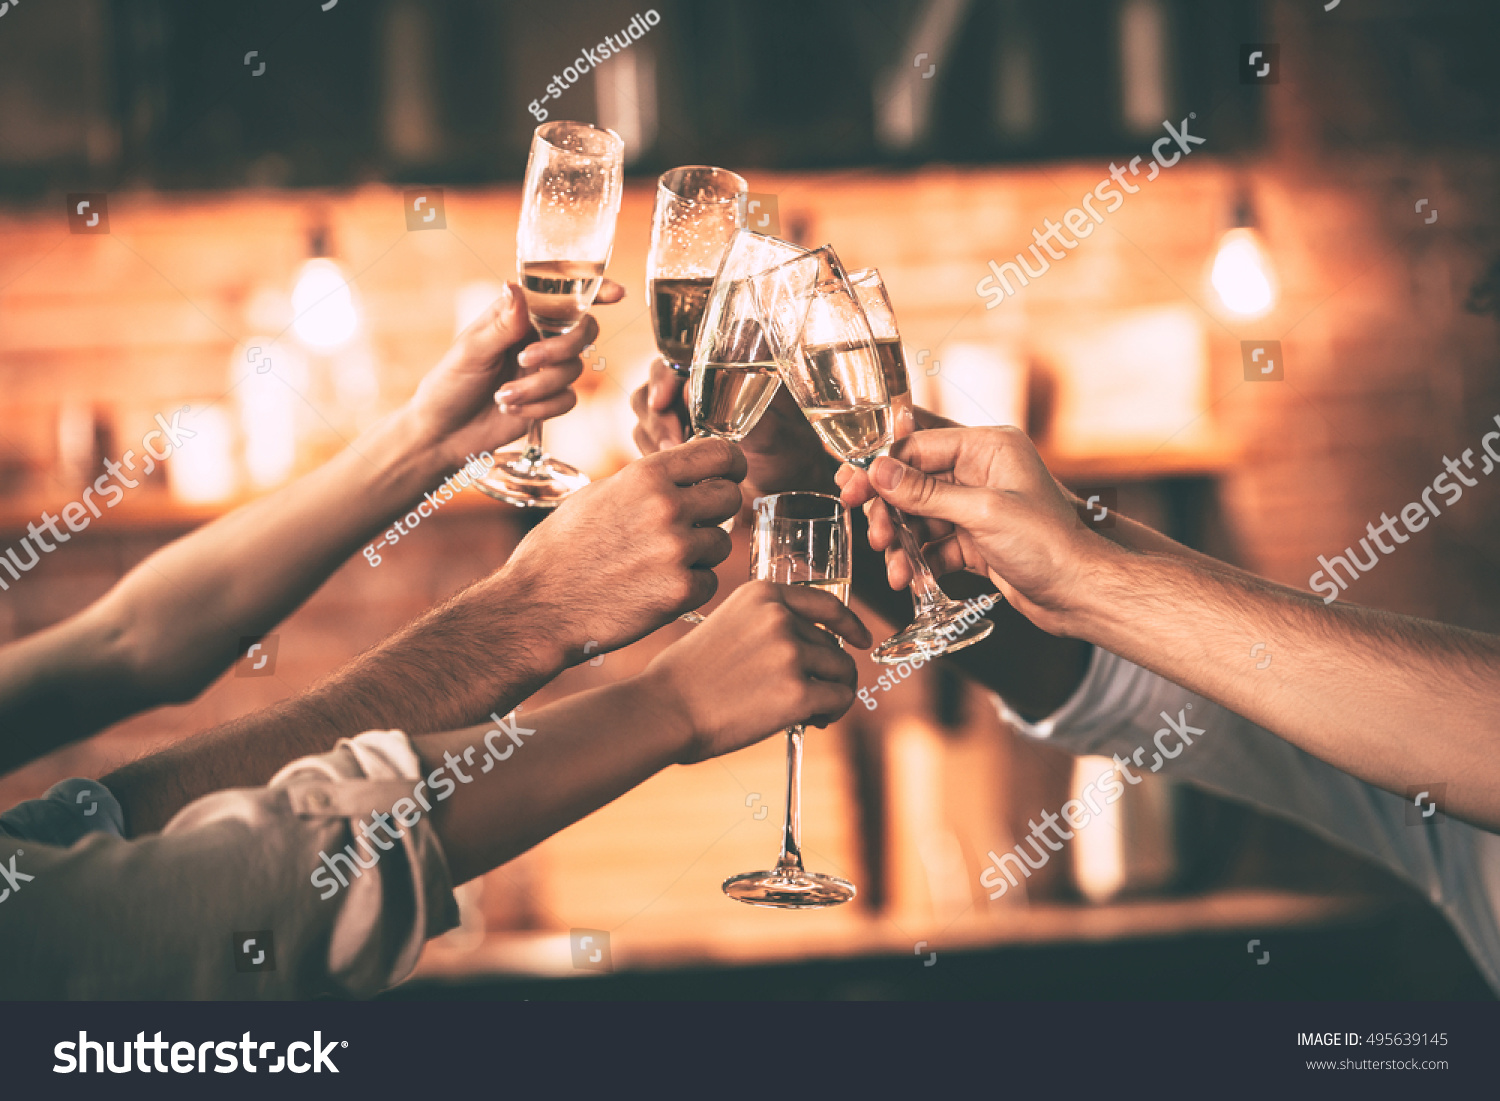 Cheers! Group of people cheering with champagne flutes with home interior in the background #495639145